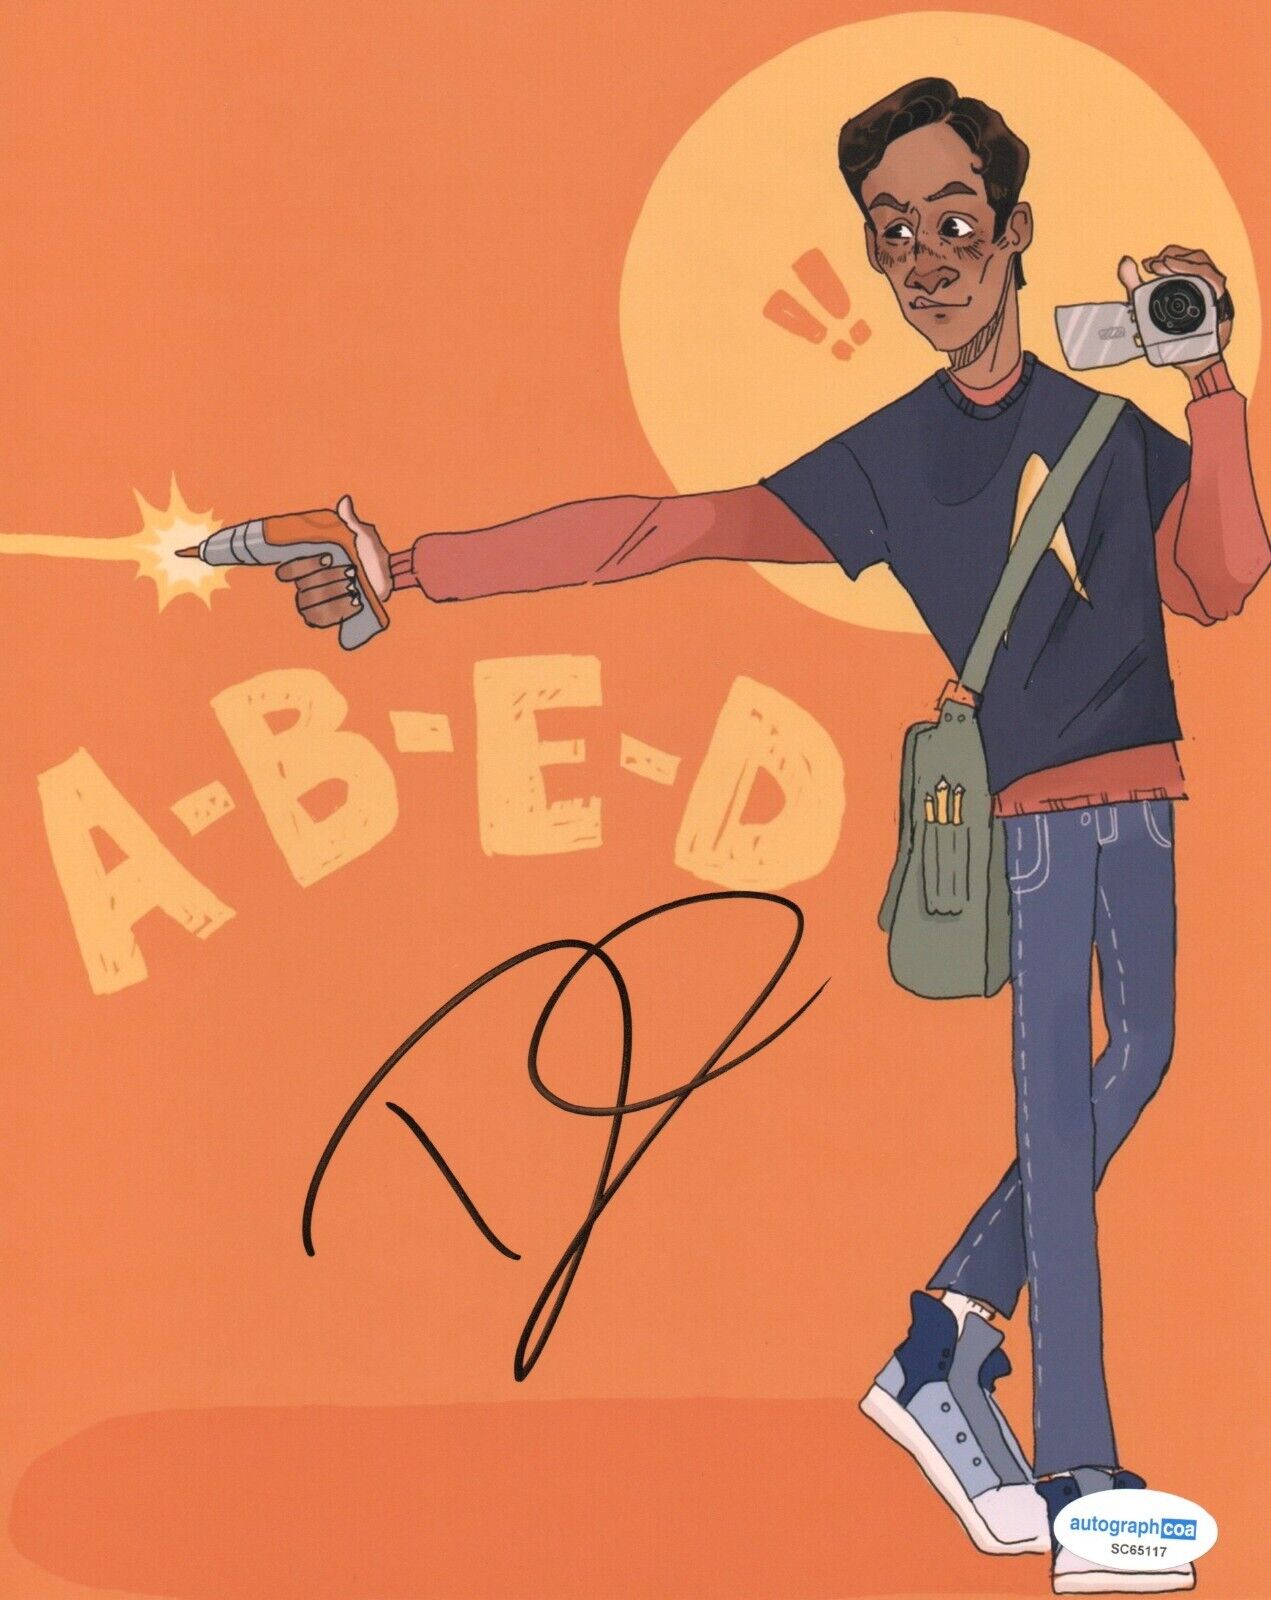 DANNY PUDI SIGNED COMMUNITY PHOTO ABED (2) ALSO ACOA CERTIFIED